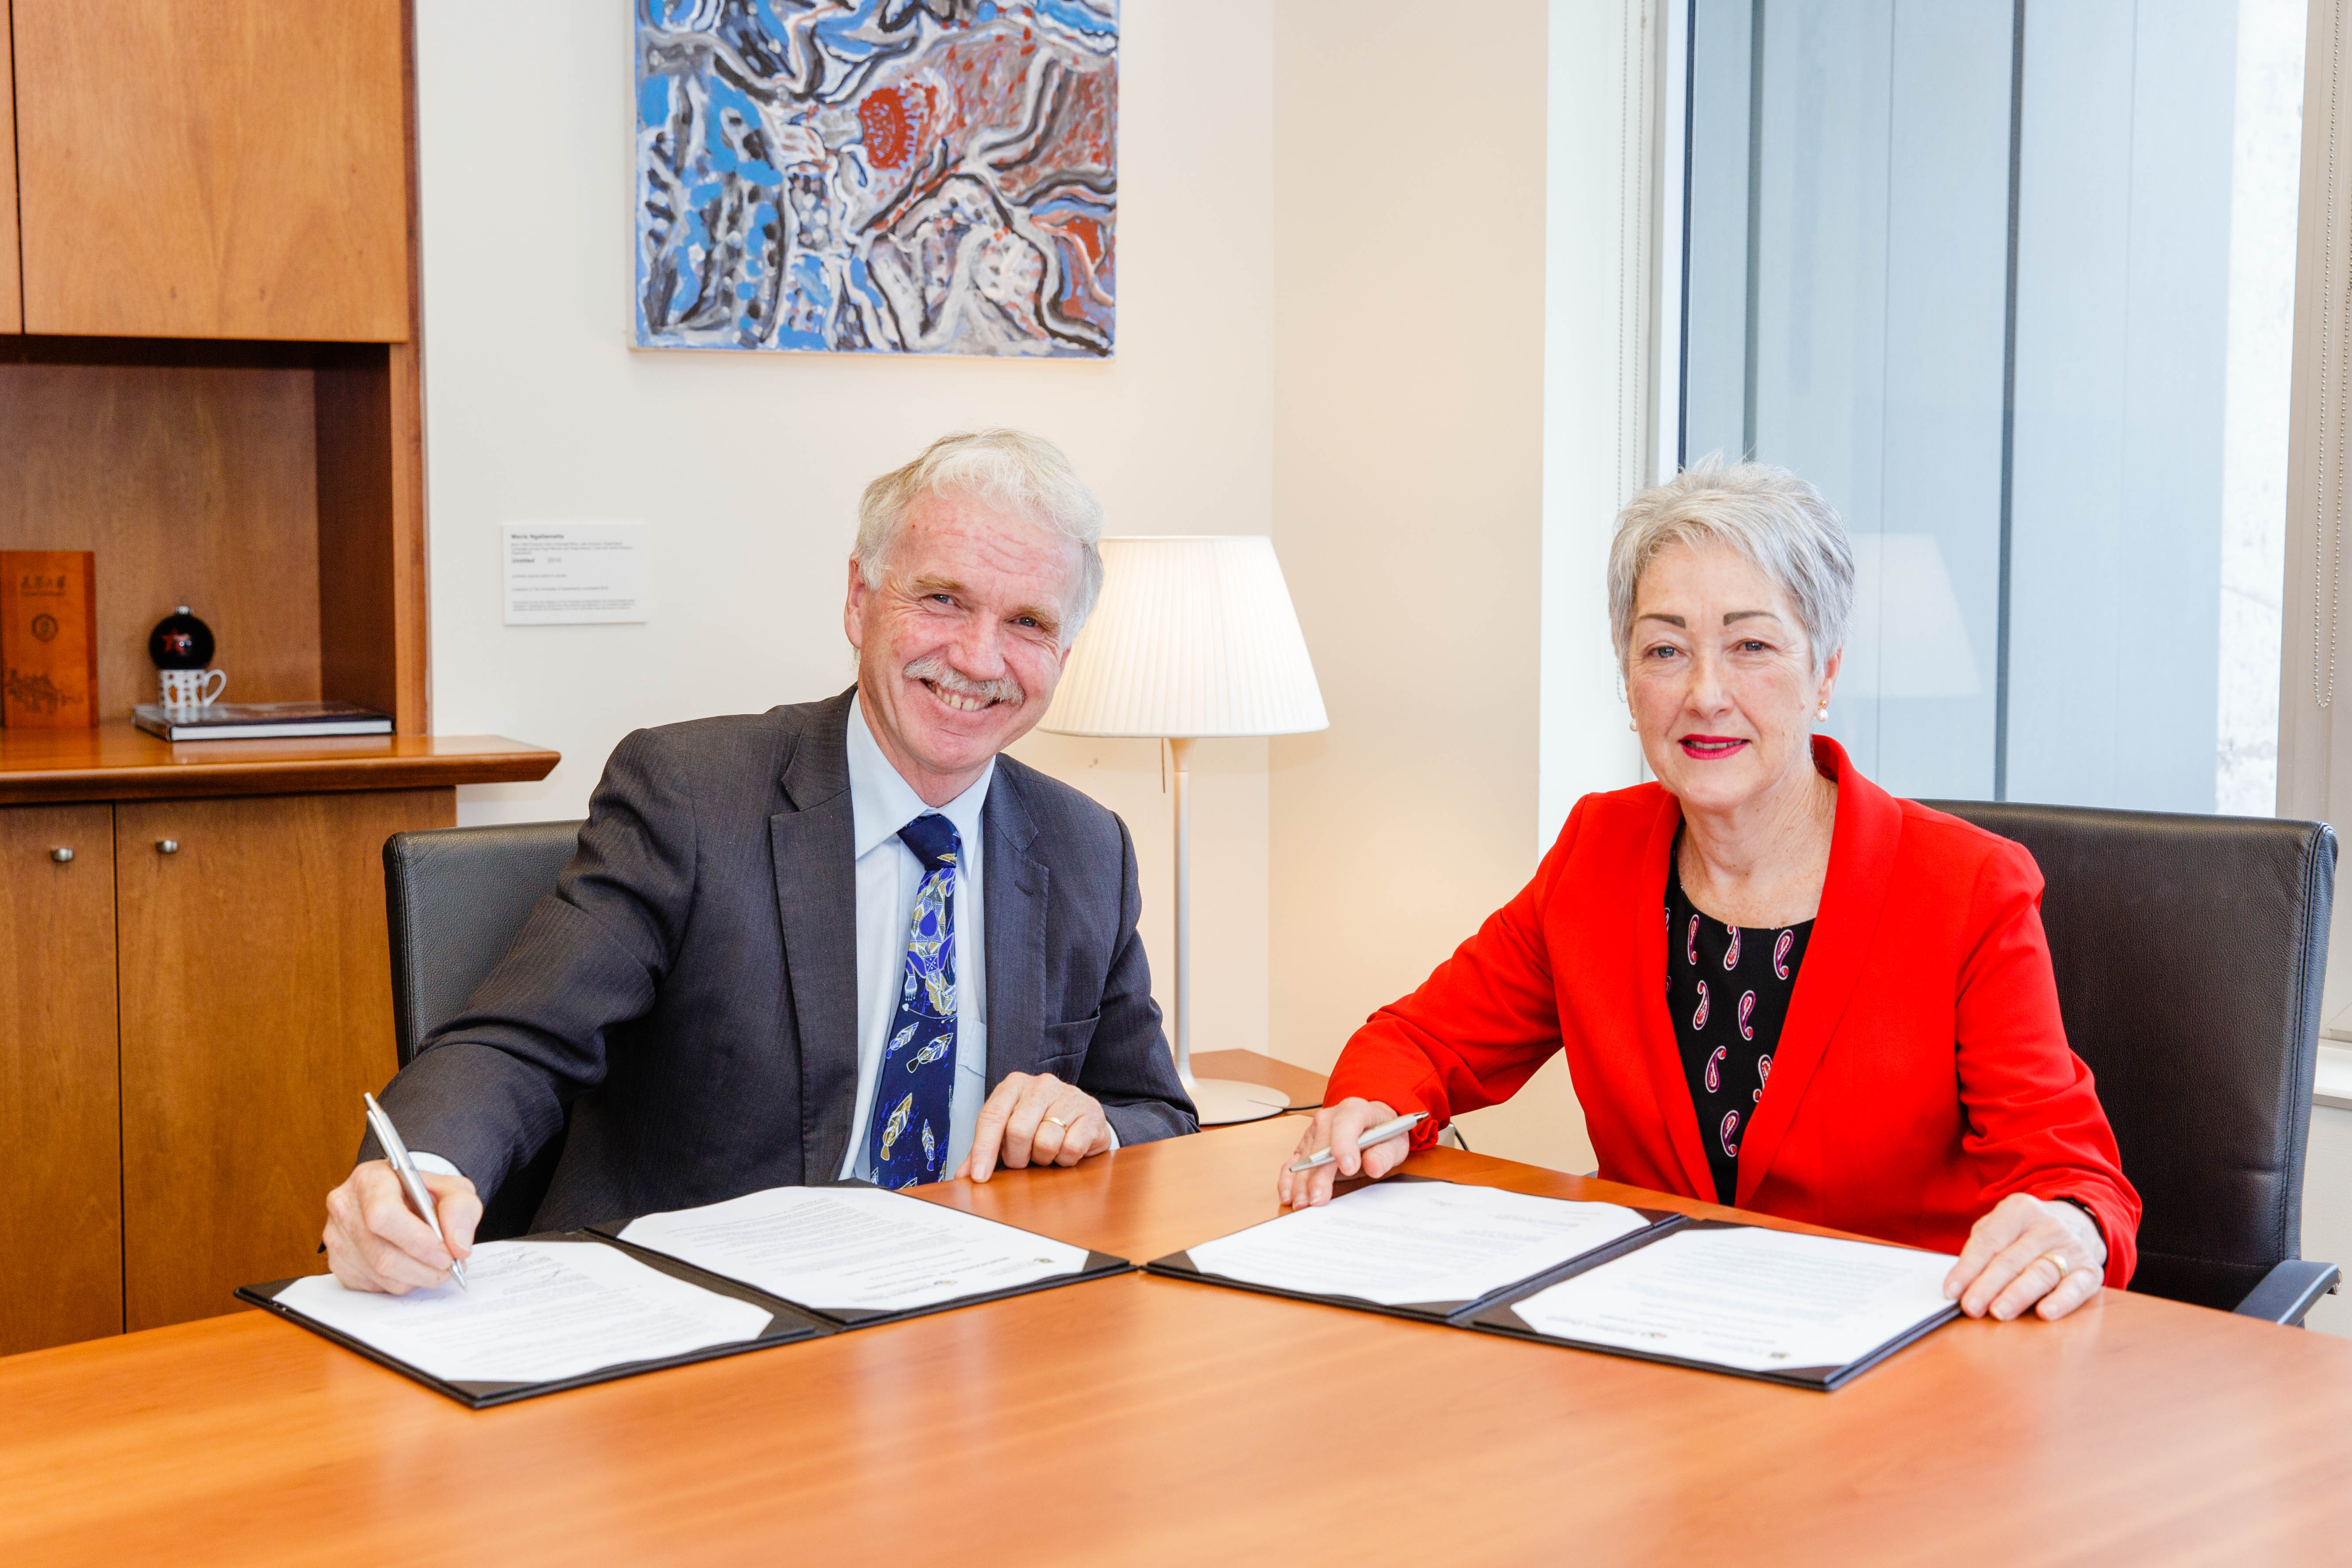 Acting Vice-Chancellor Professor Aidan Byrne and SDRC Mayor Tracy Dobie